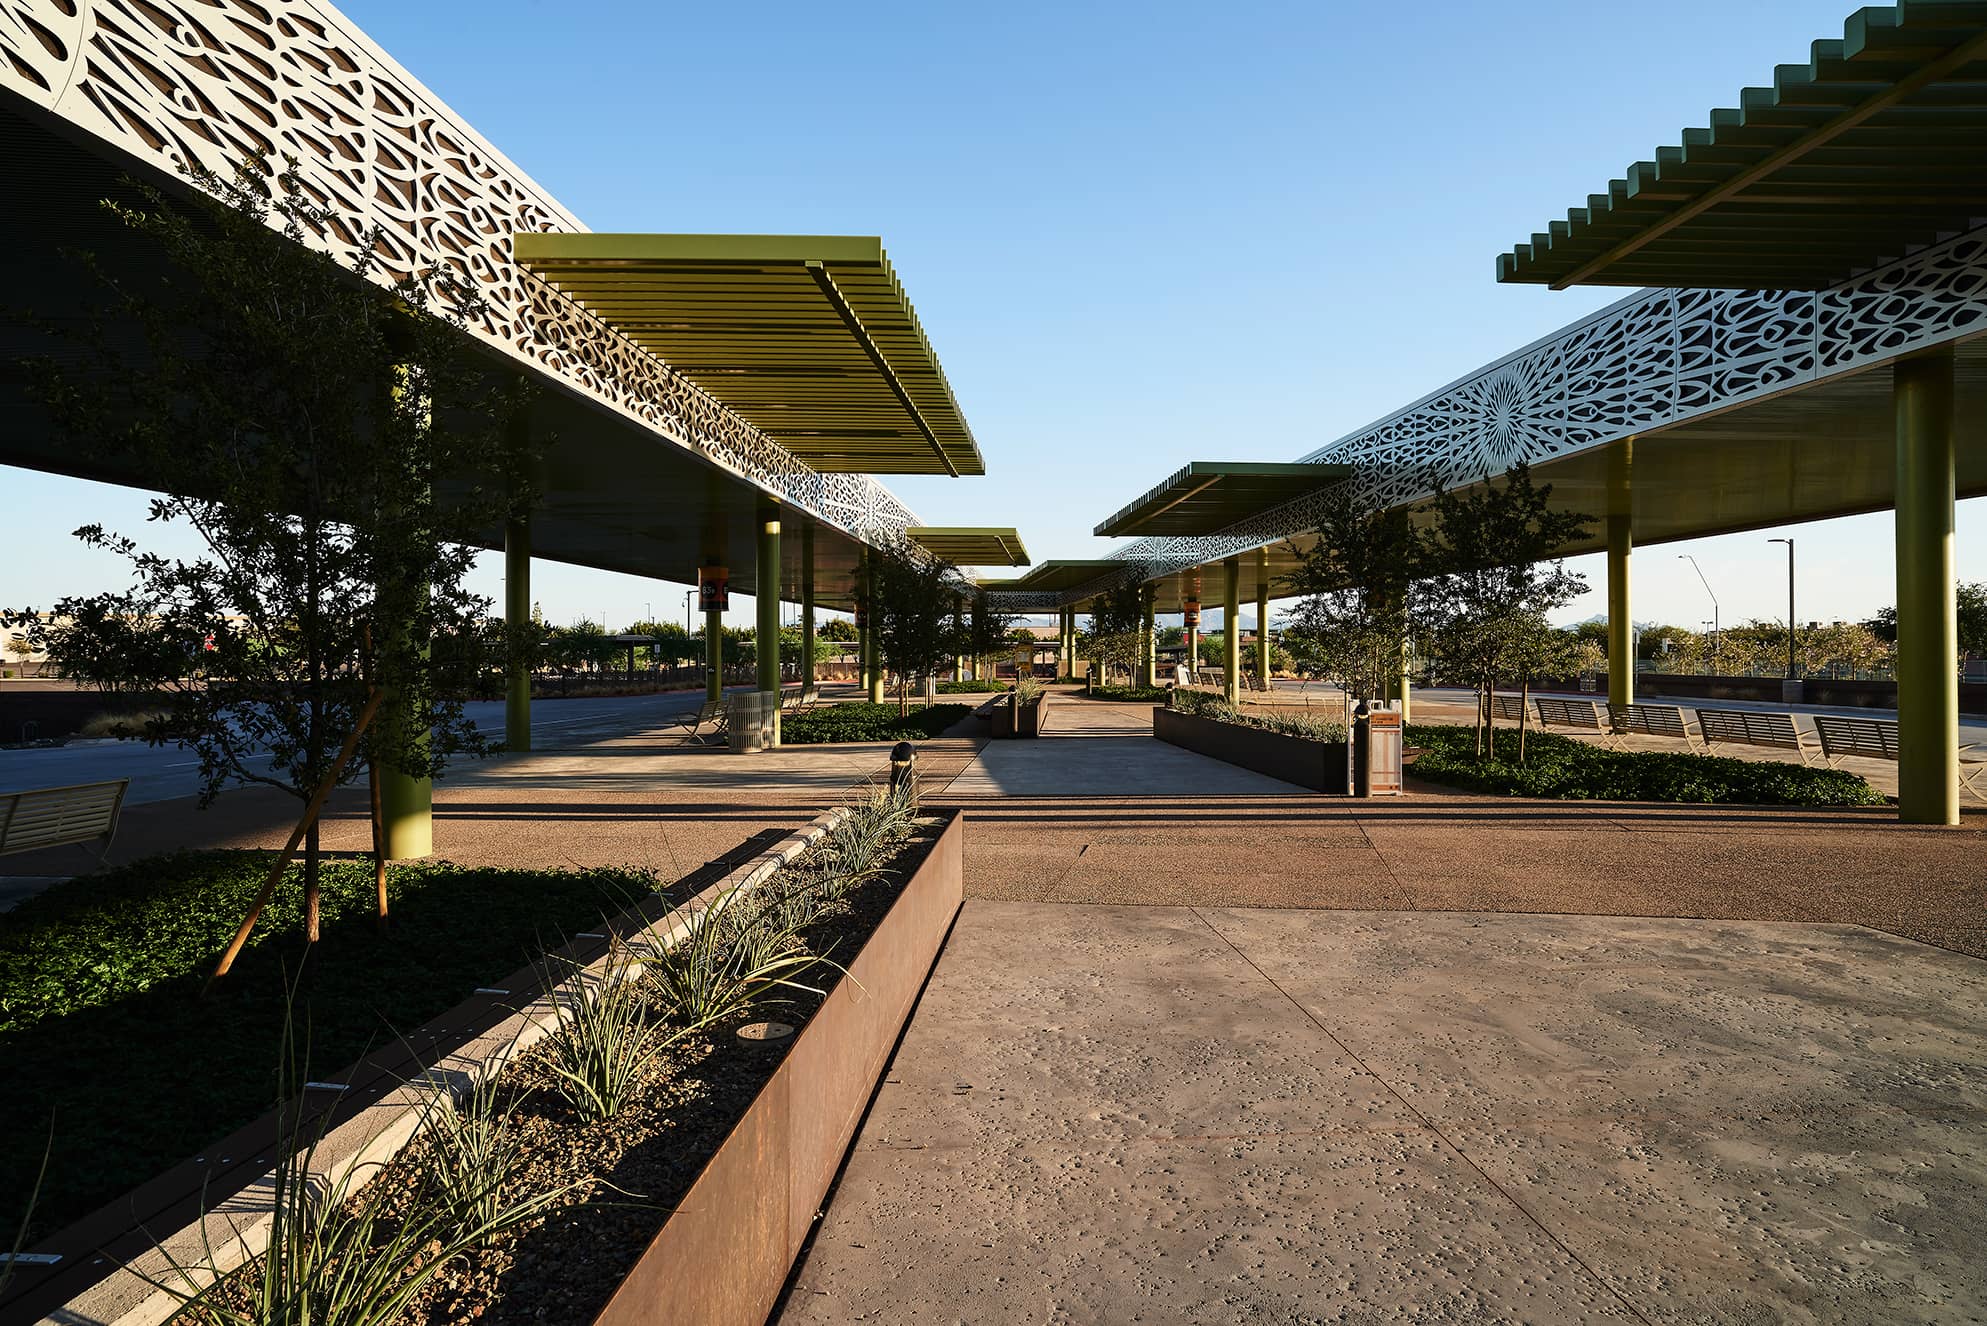 Kimley-Horn provided design, permitting, and construction phase services for the Desert Sky Transit Center for the Phoenix Public Transit Department.